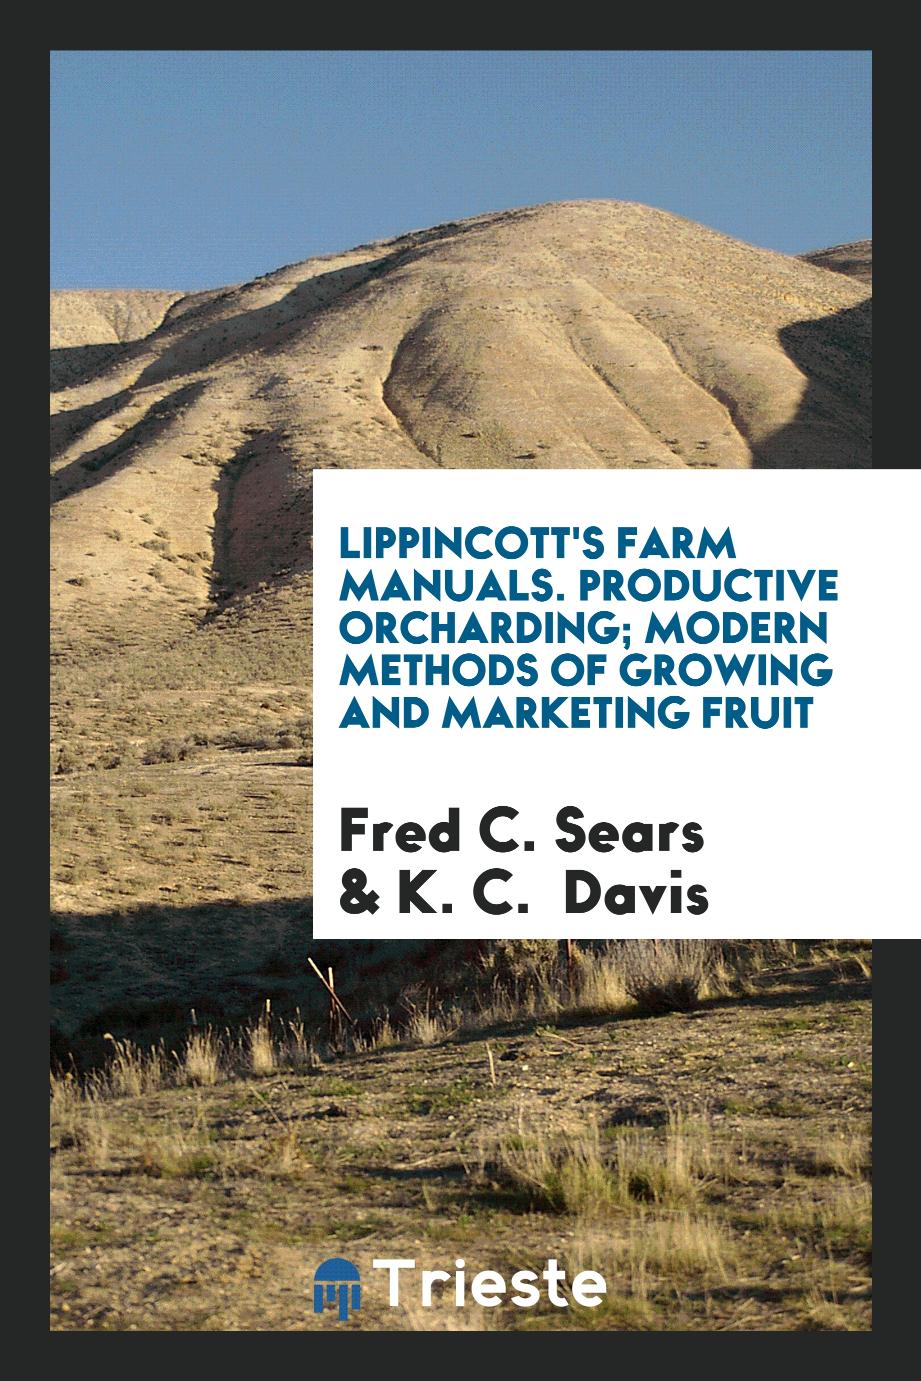 Lippincott's Farm Manuals. Productive Orcharding; Modern Methods of Growing and Marketing Fruit